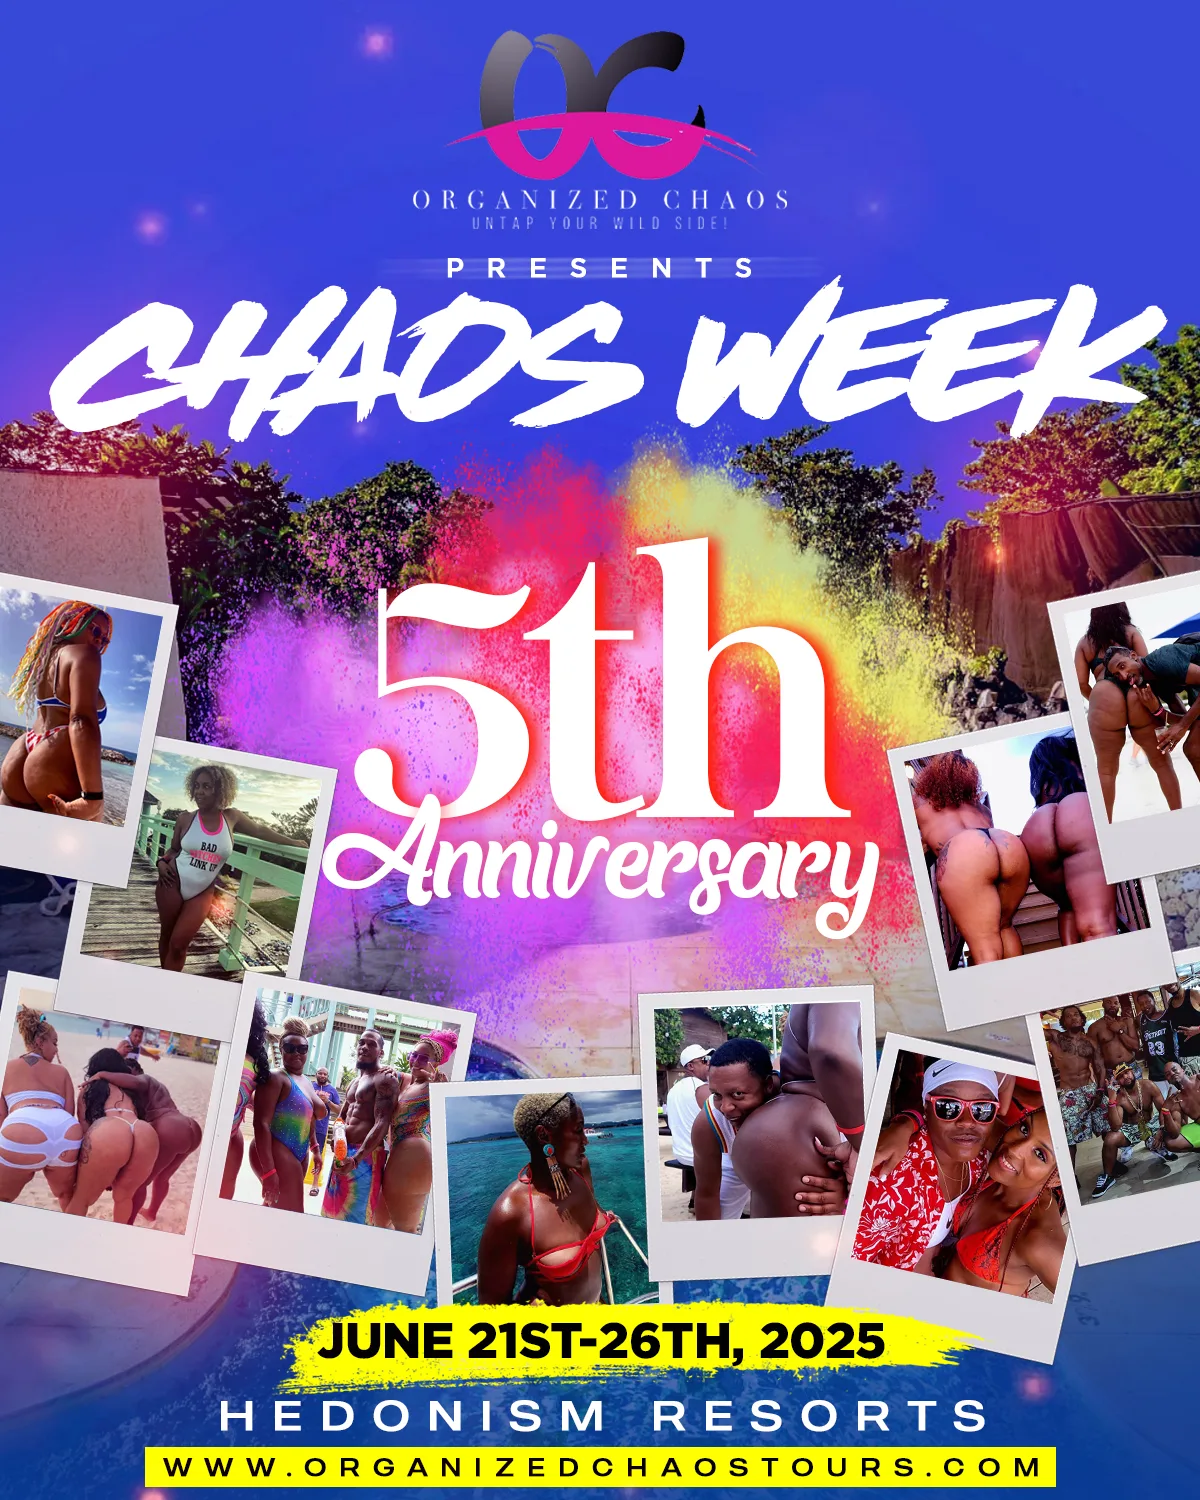 Hedonism II Group Event - Organized Chaos Chaos Week, June 21 - 26, 2025